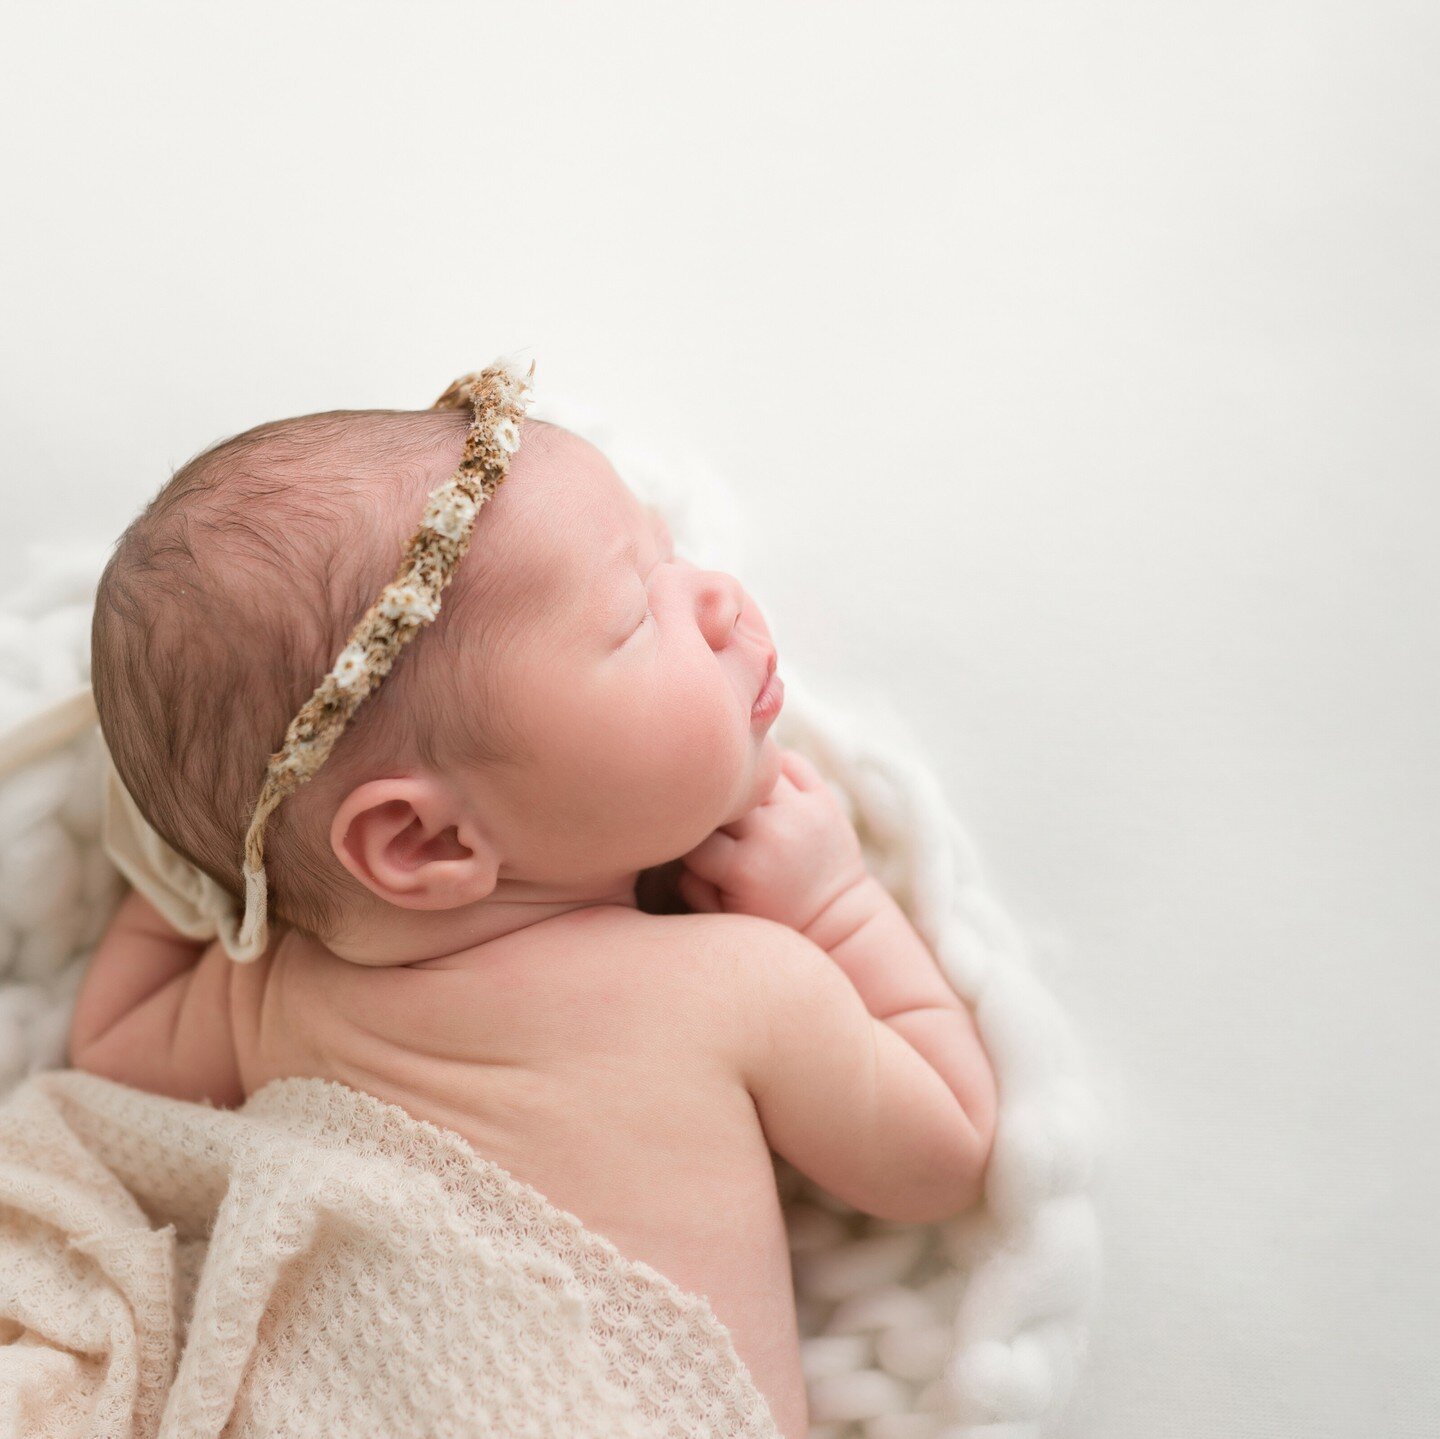 The sweetest view 🥰

Don&rsquo;t forget to book your newborn session before baby arrives! Securing your spot in advance helps us coordinate and prep for a successful session, regardless of when baby decides to come. Bring on the spring babies! 

*
*